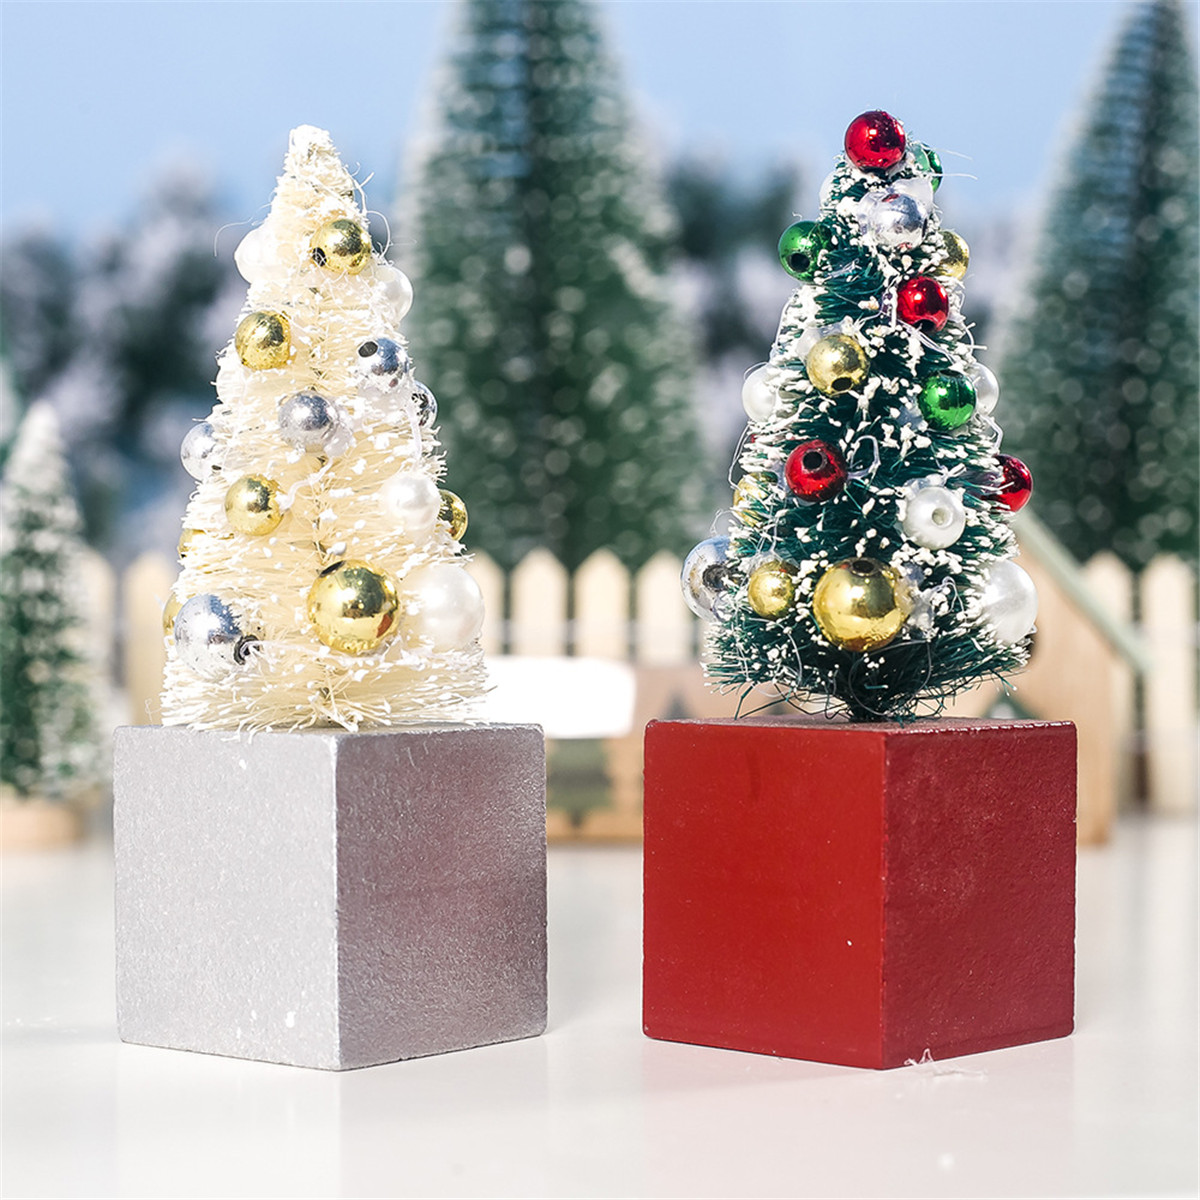 2pcs-Mini-Christmas-Tree-Mall-Home-Office-Decorations-Tree-Ornament-Creative-Gifts-Tree-Crafts-Child-1763753-4